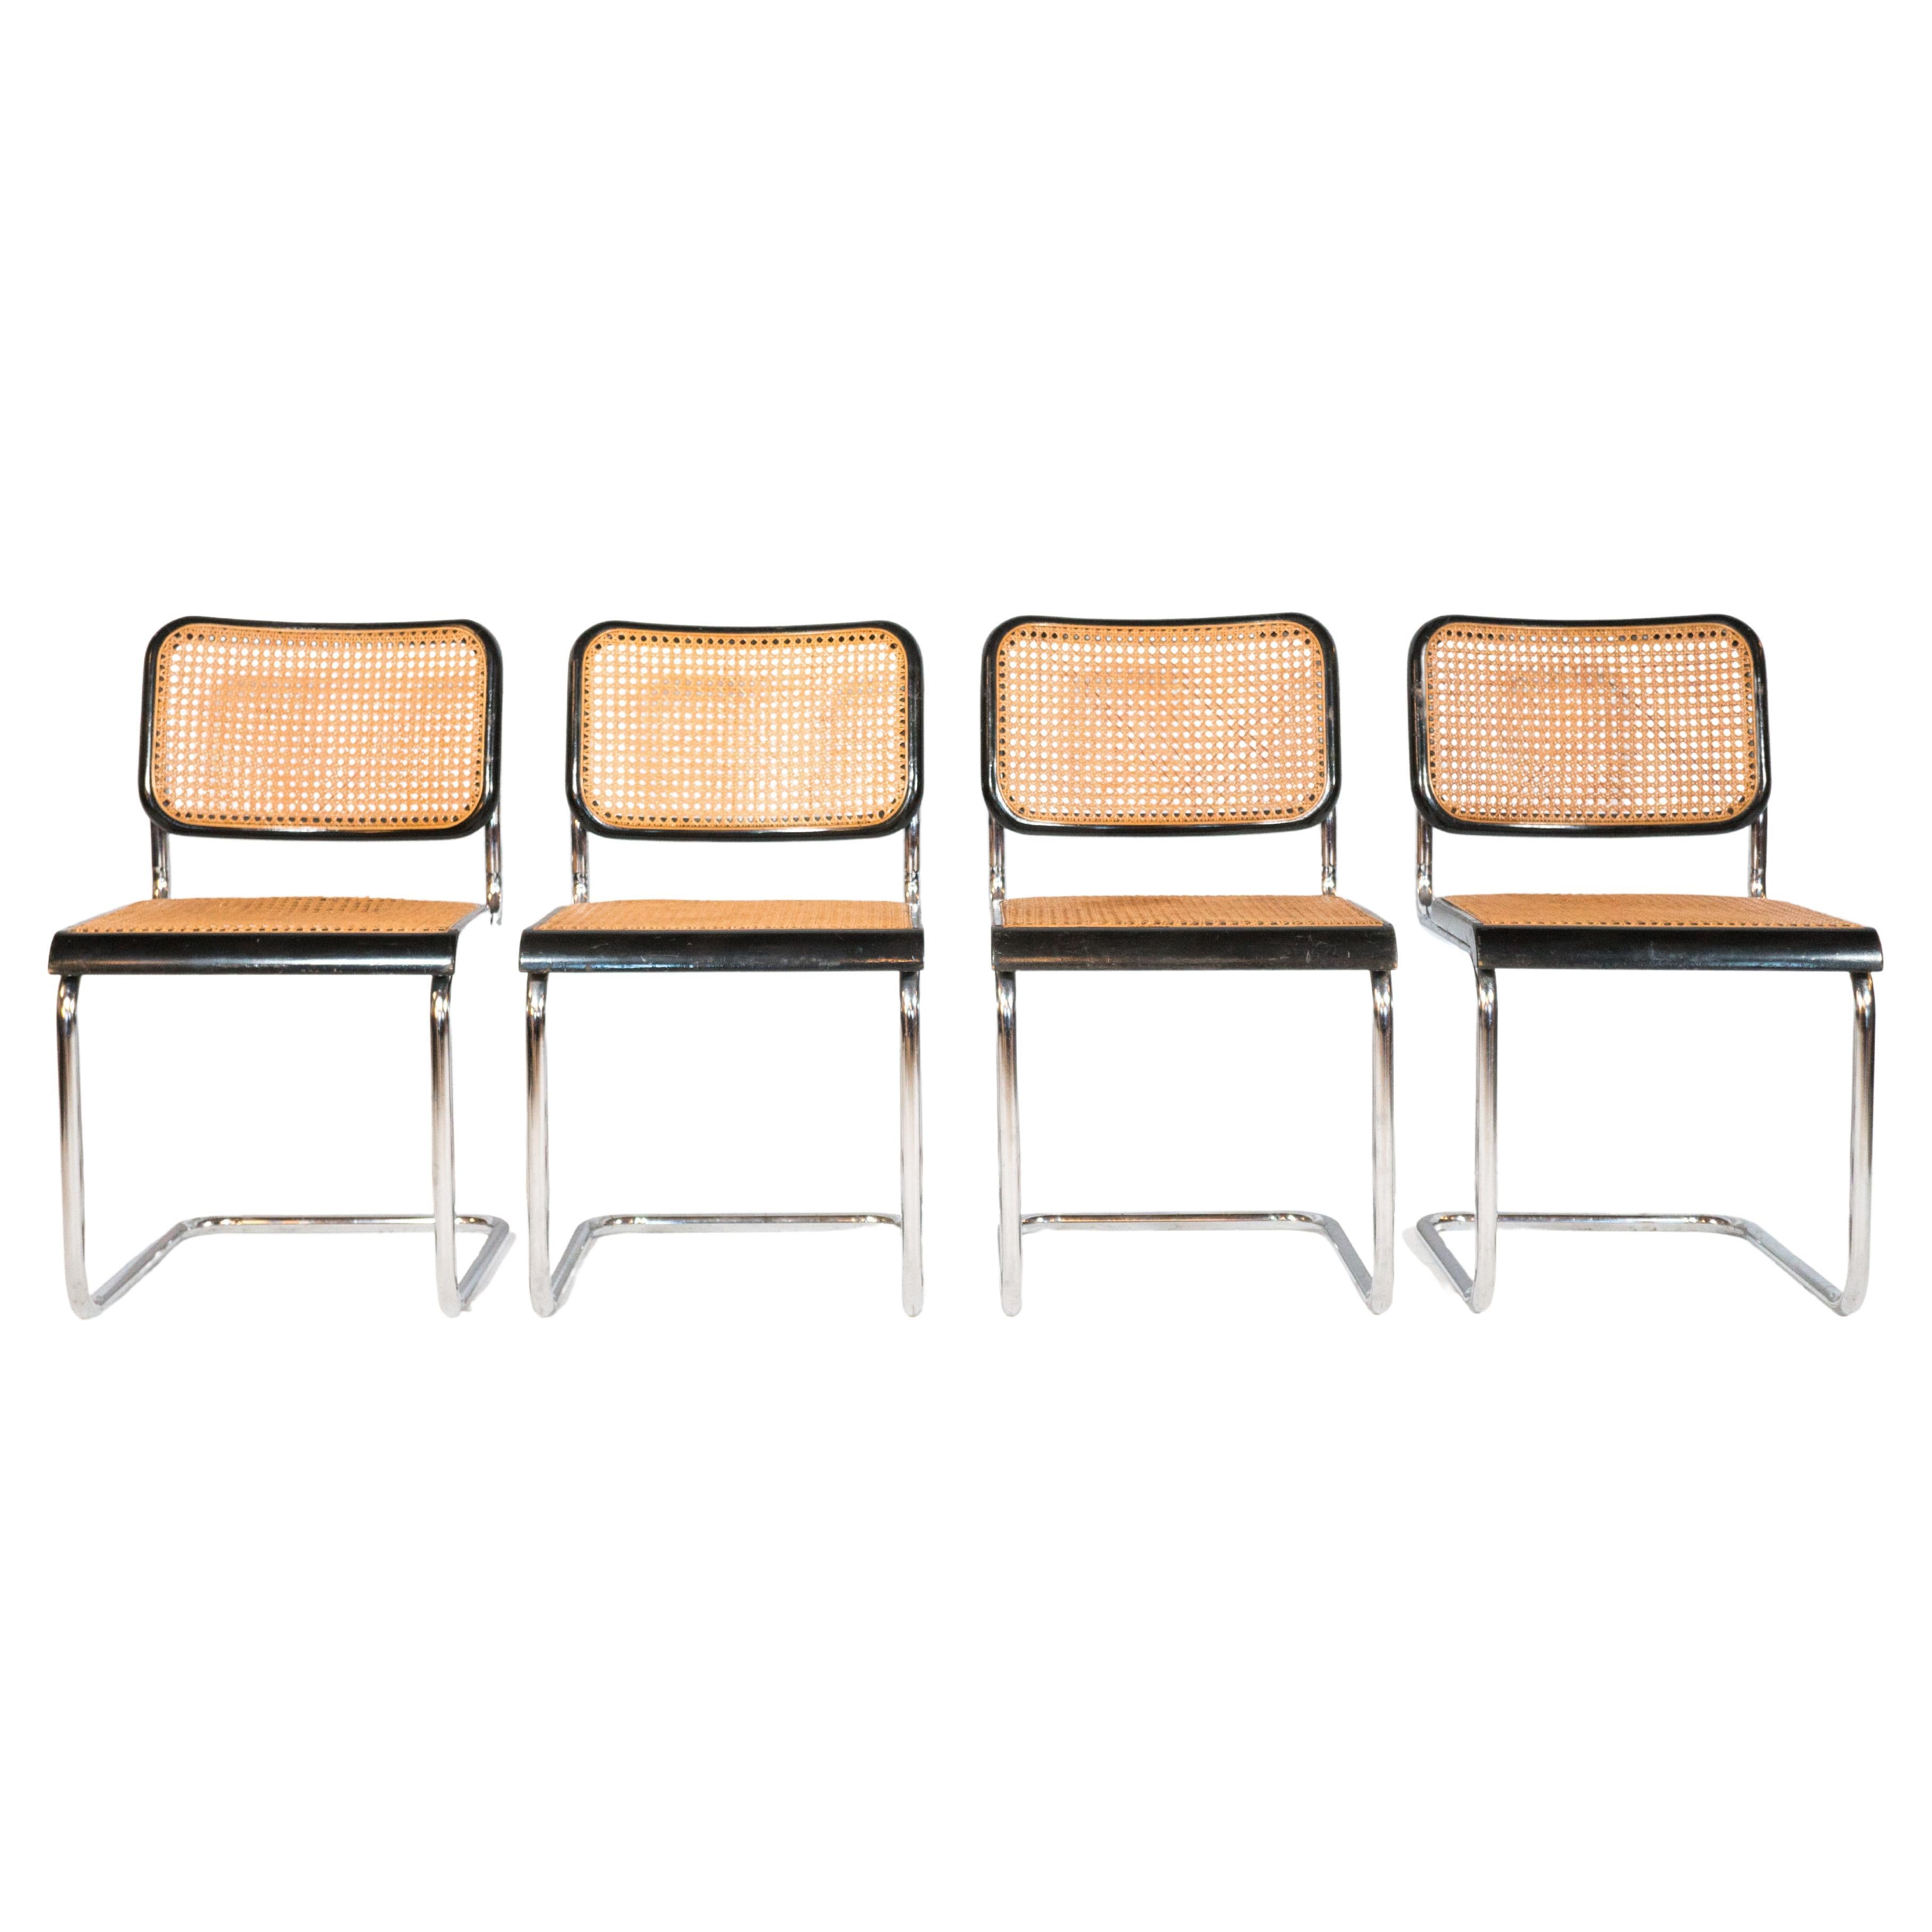 1960s Vintage Marcel Breuer Attributed. Cesca Dining Chairs by Gfm - Set of 4 For Sale